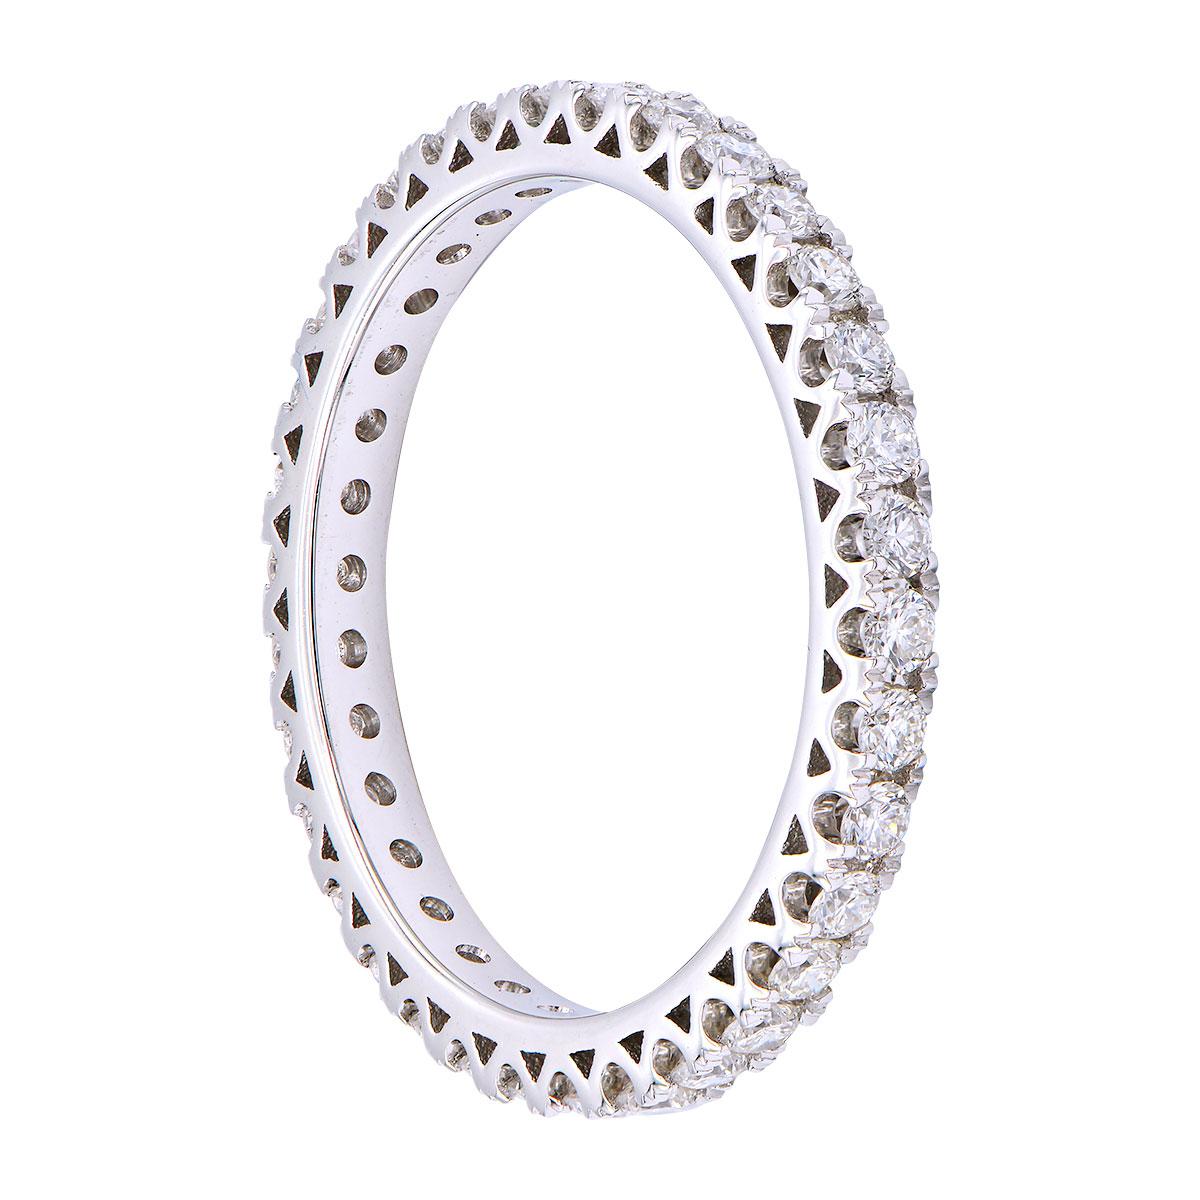 This gorgeous diamond eternity band has 33 round VS2, G color diamonds totaling 0.60 carats. They are set in 1.8 grams of 18 karat white gold. The gold prongs add a beautiful detail from the sides and it has a smooth comfortable fit. This ring is